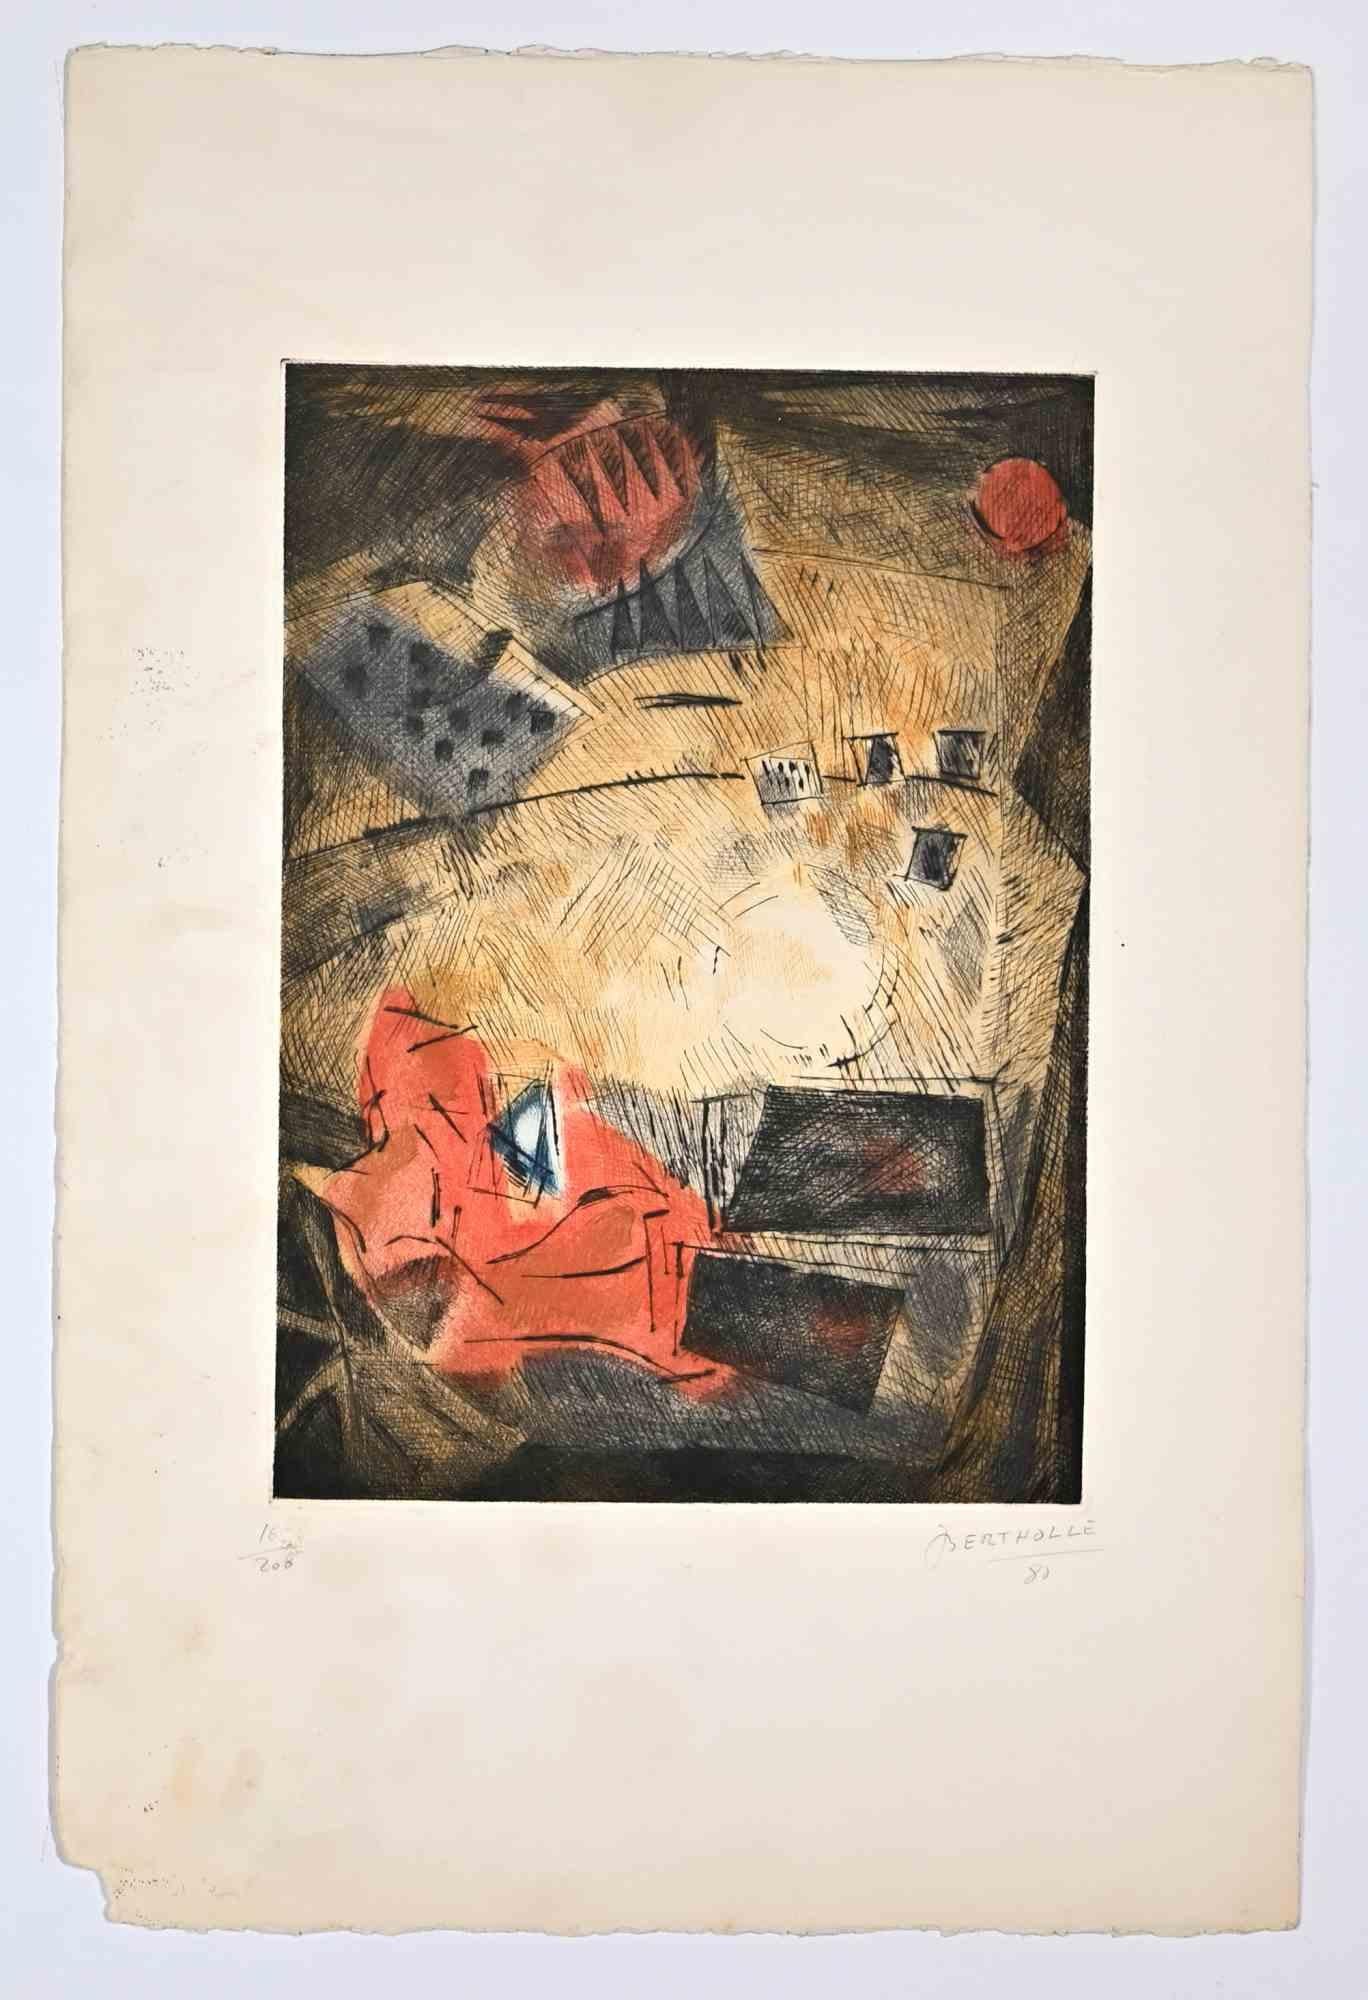 Abstract Composition is an etching print realized in 1980 by Jean Bertholle (1909-1996).

Hand-signed on the lower and date.

Numbered. Edition, 16/200.

Good Conditions.

The artwork is depicted through soft strokes in a well-balanced composition.